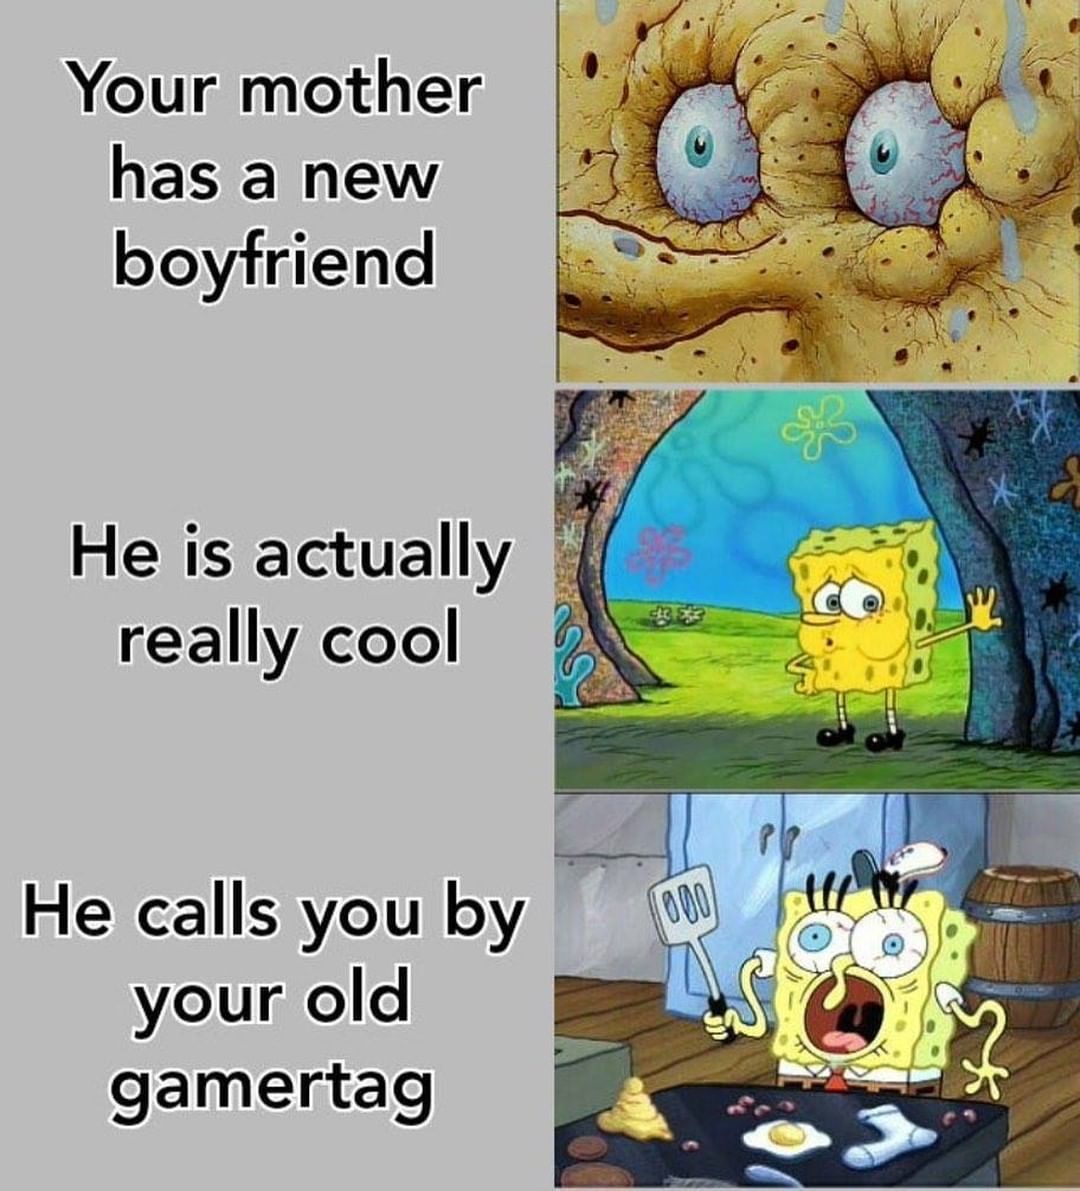 Your mother has a new boyfriend. He is actually really cool. He calls you by your old gamertag.